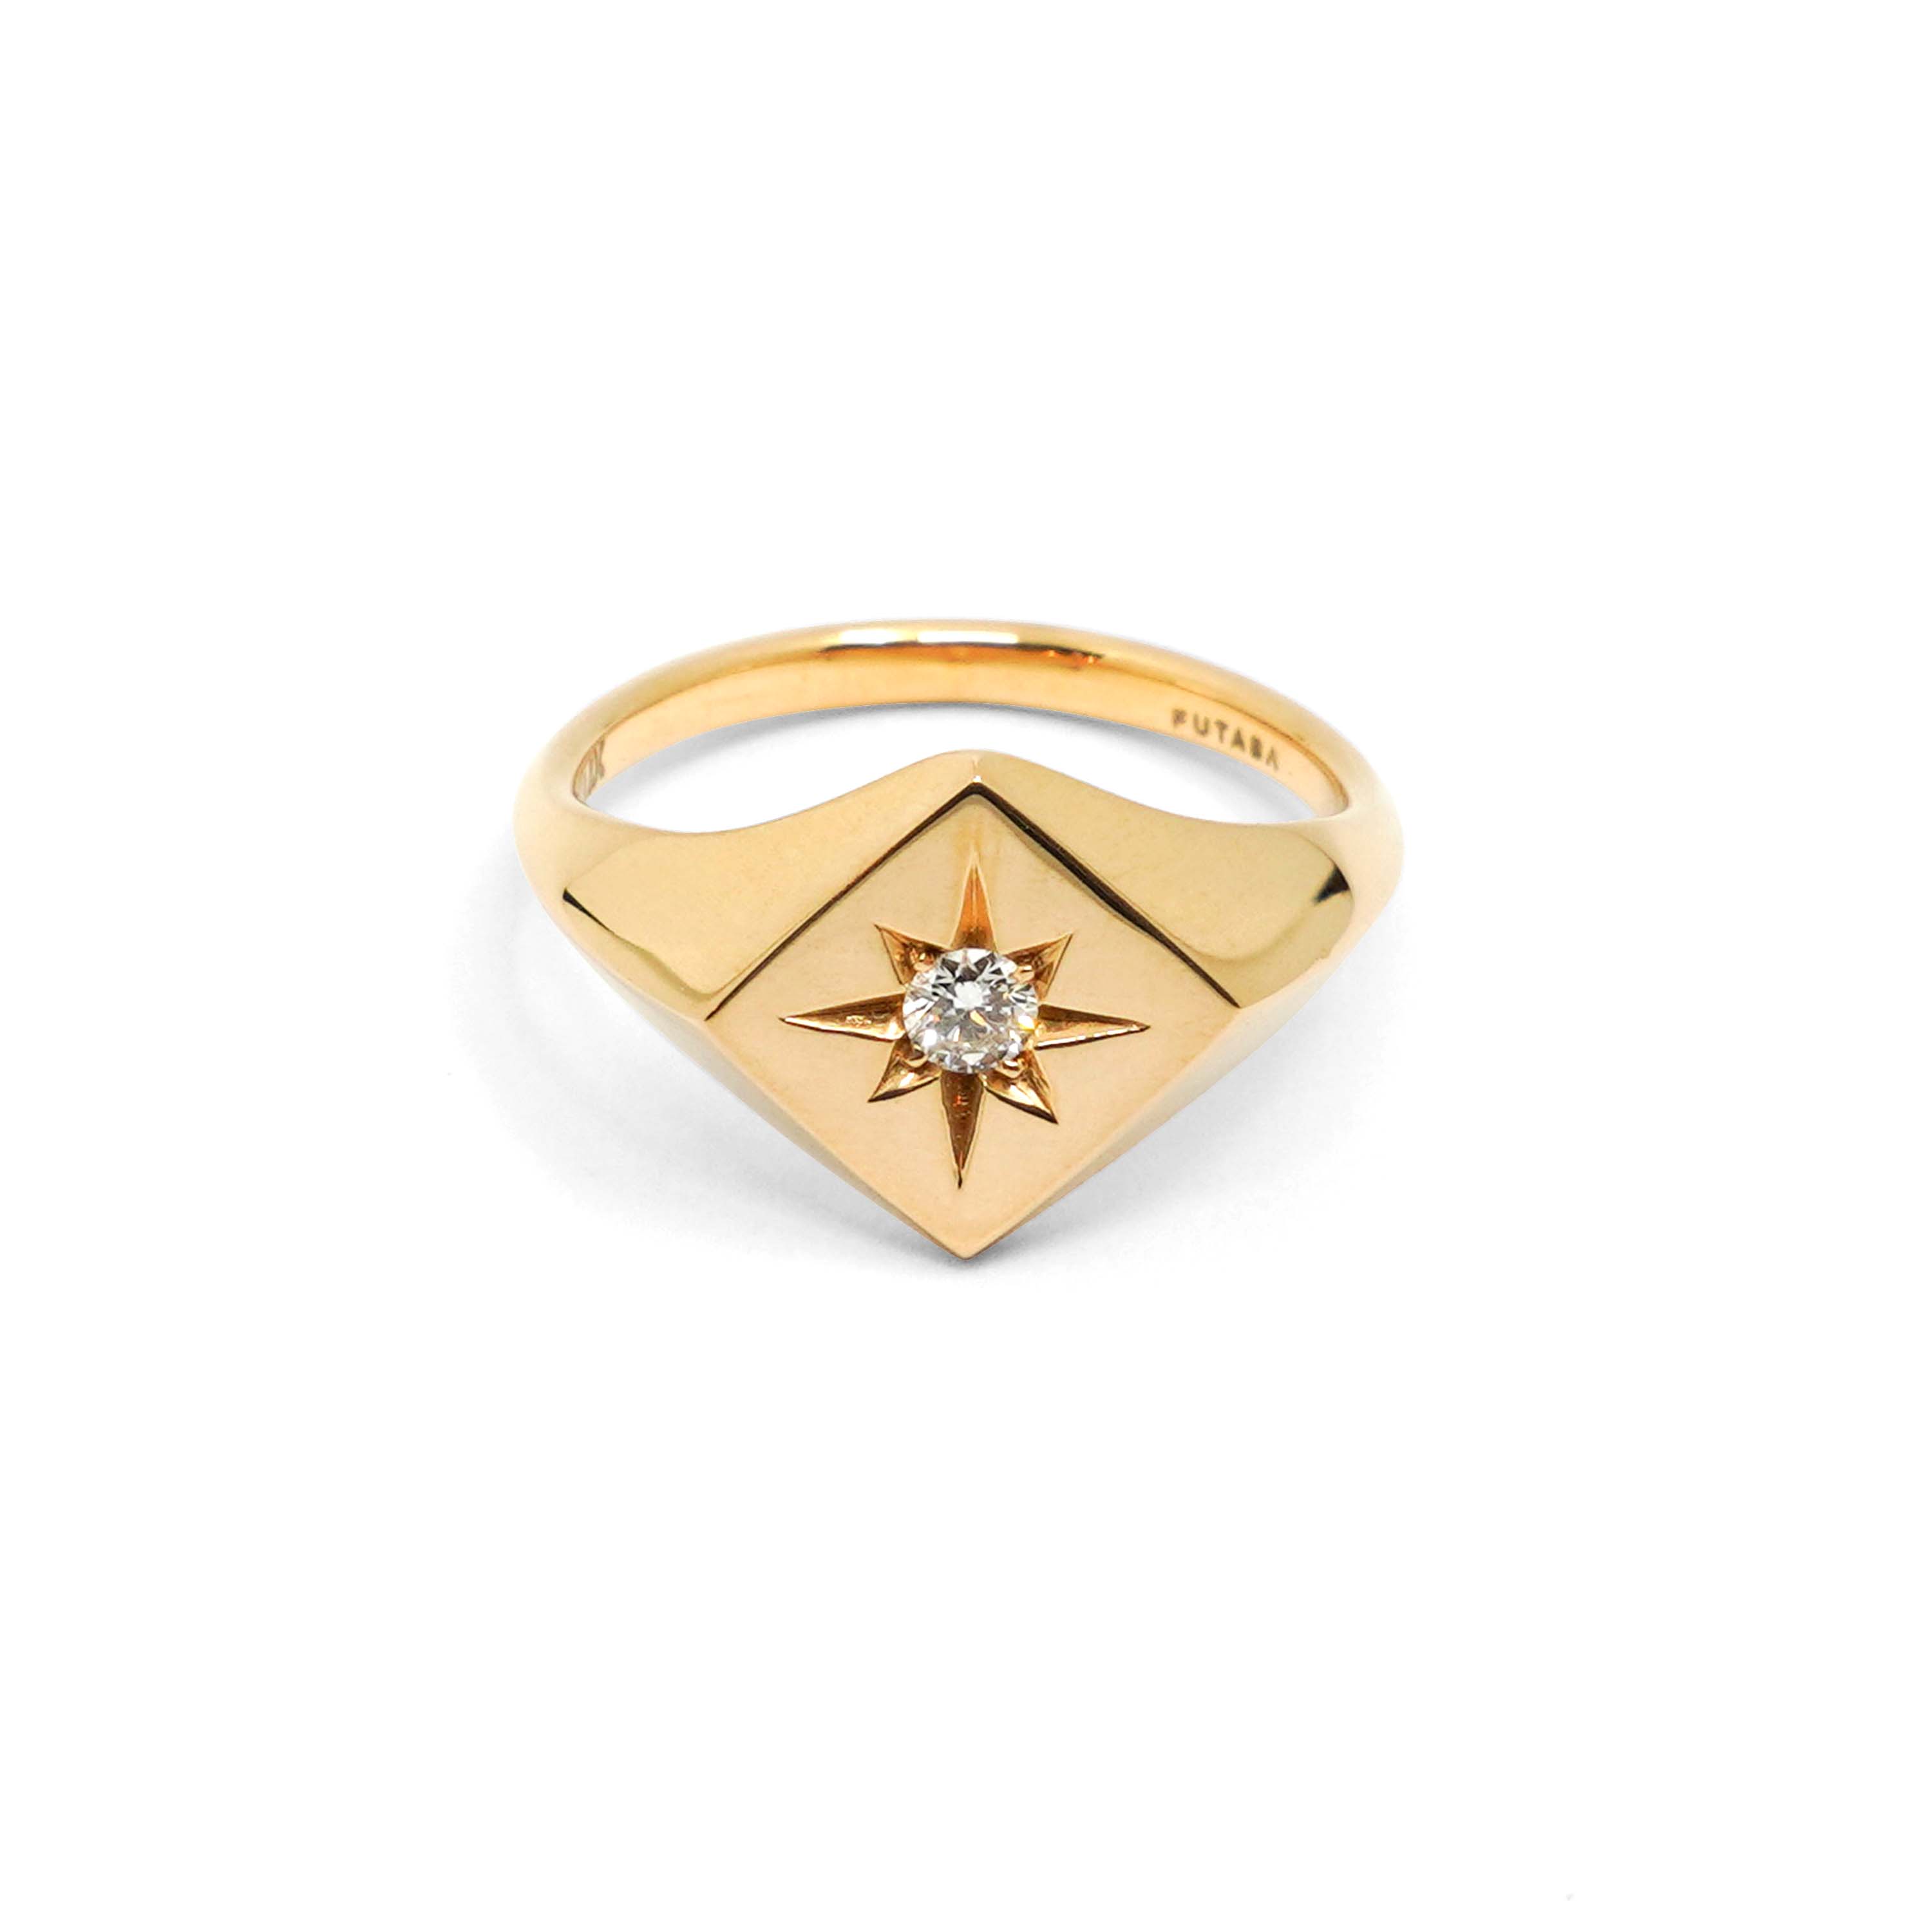 North Star Signet Ring with White Diamond